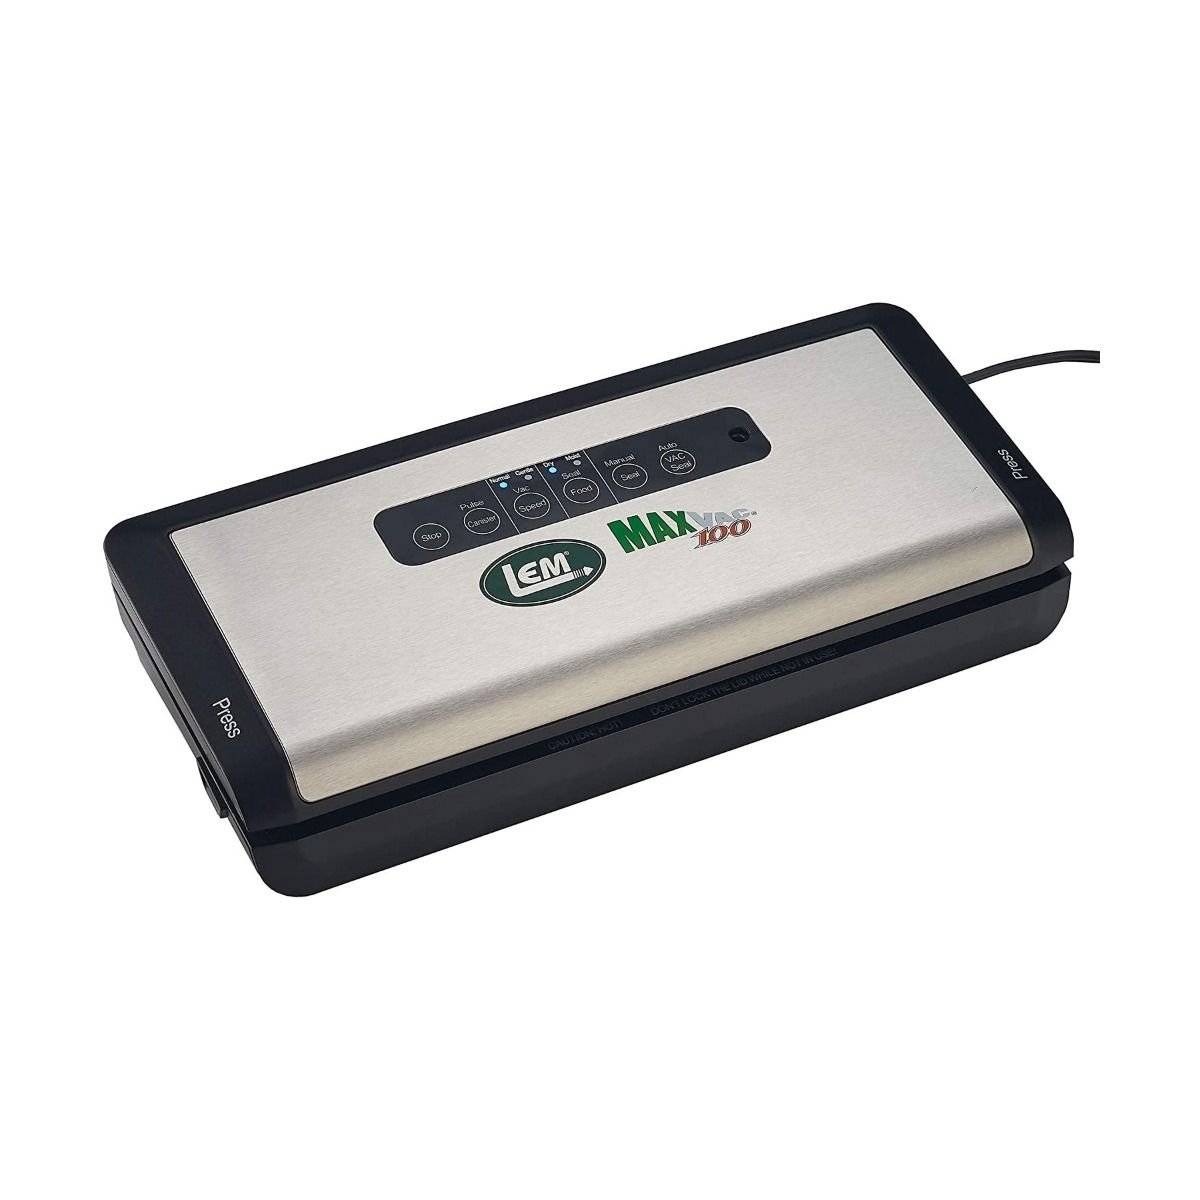 Lem Products 1088B MaxVac 1000 Vacuum Sealer with Bag Holder & Cutter